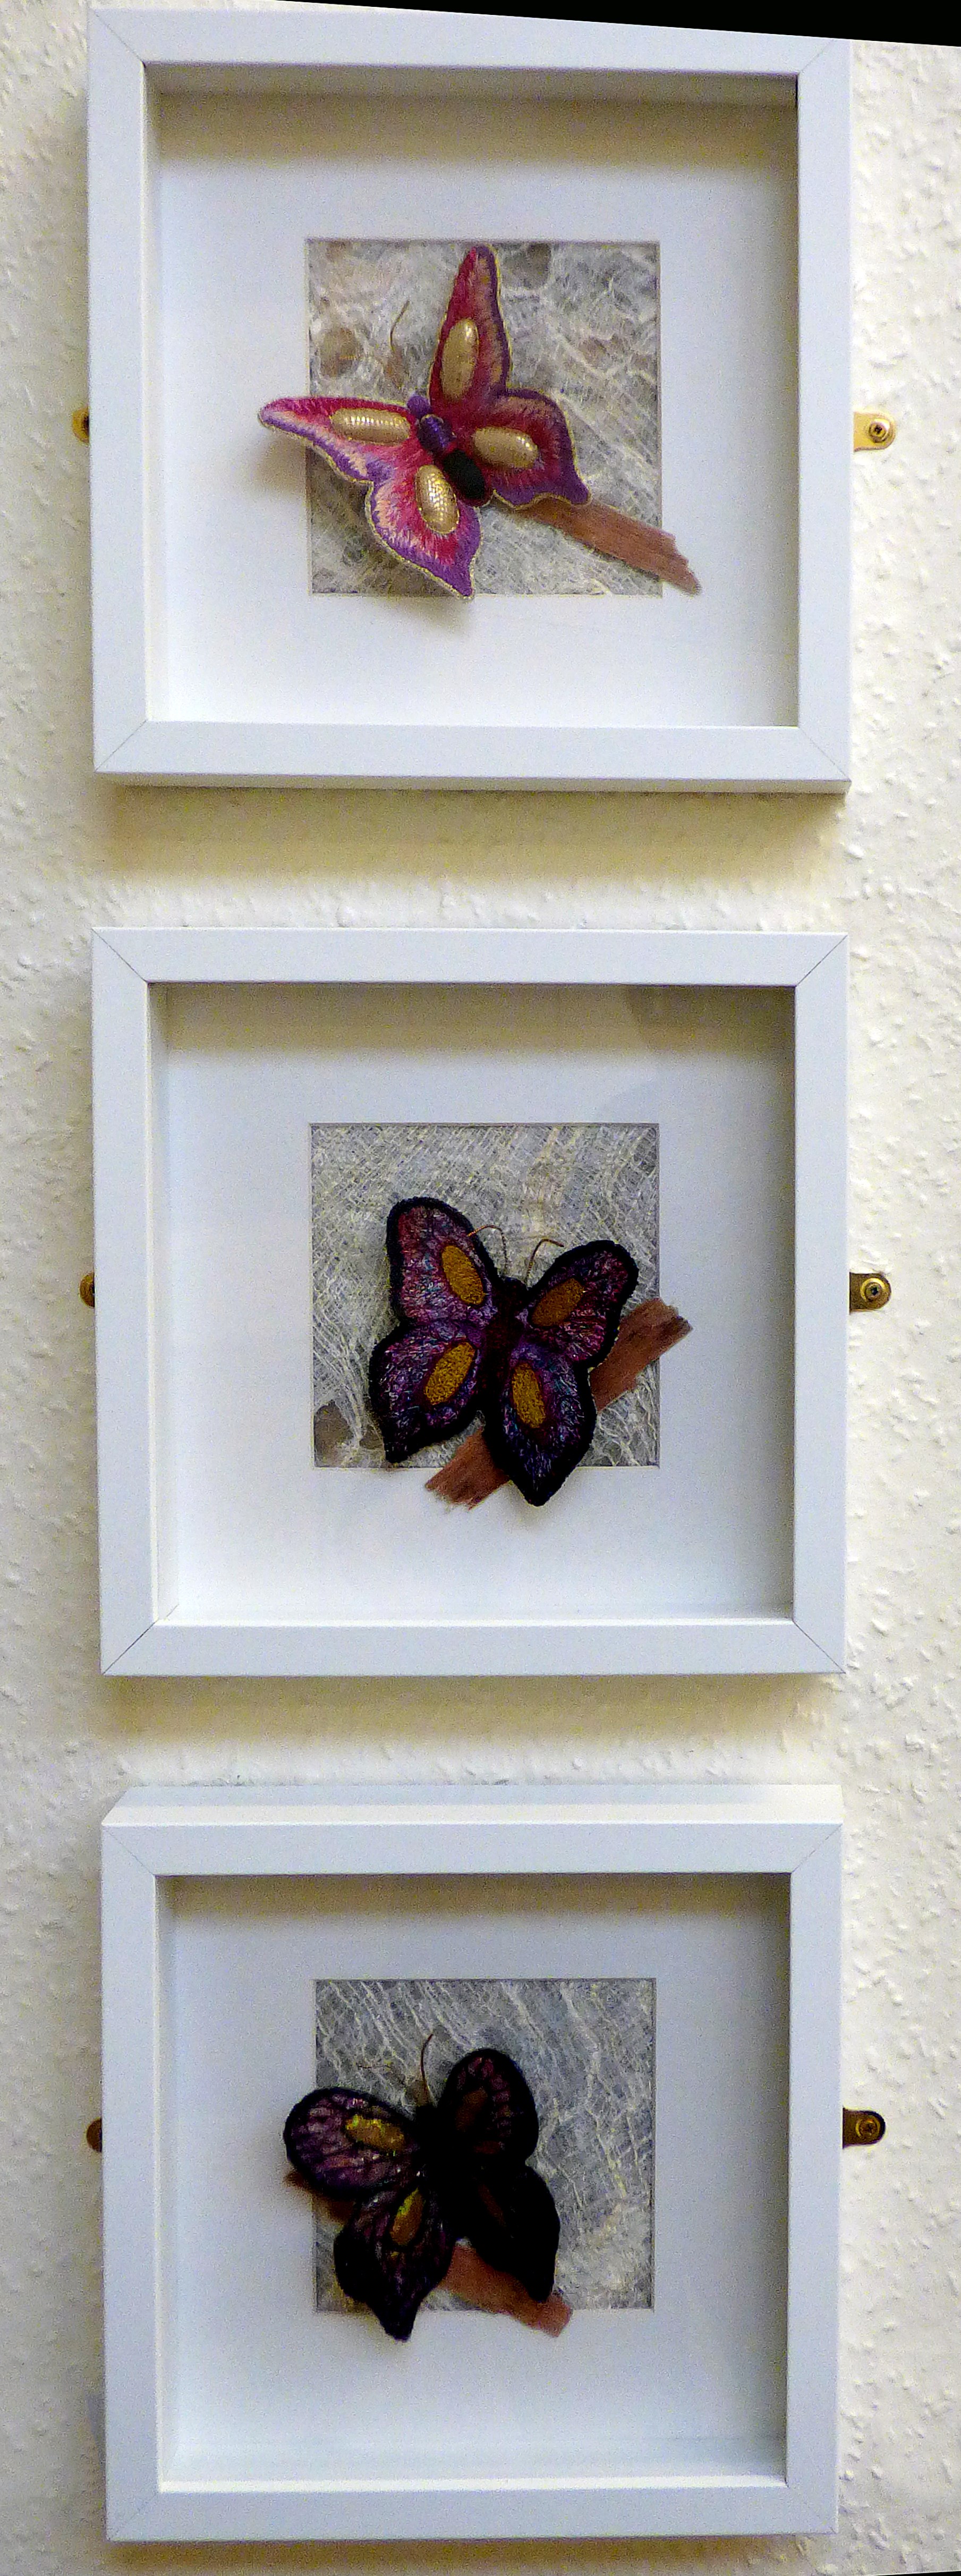 3 BUTTERFLIES by Claire Danks, 3 small square hand stitched pieces